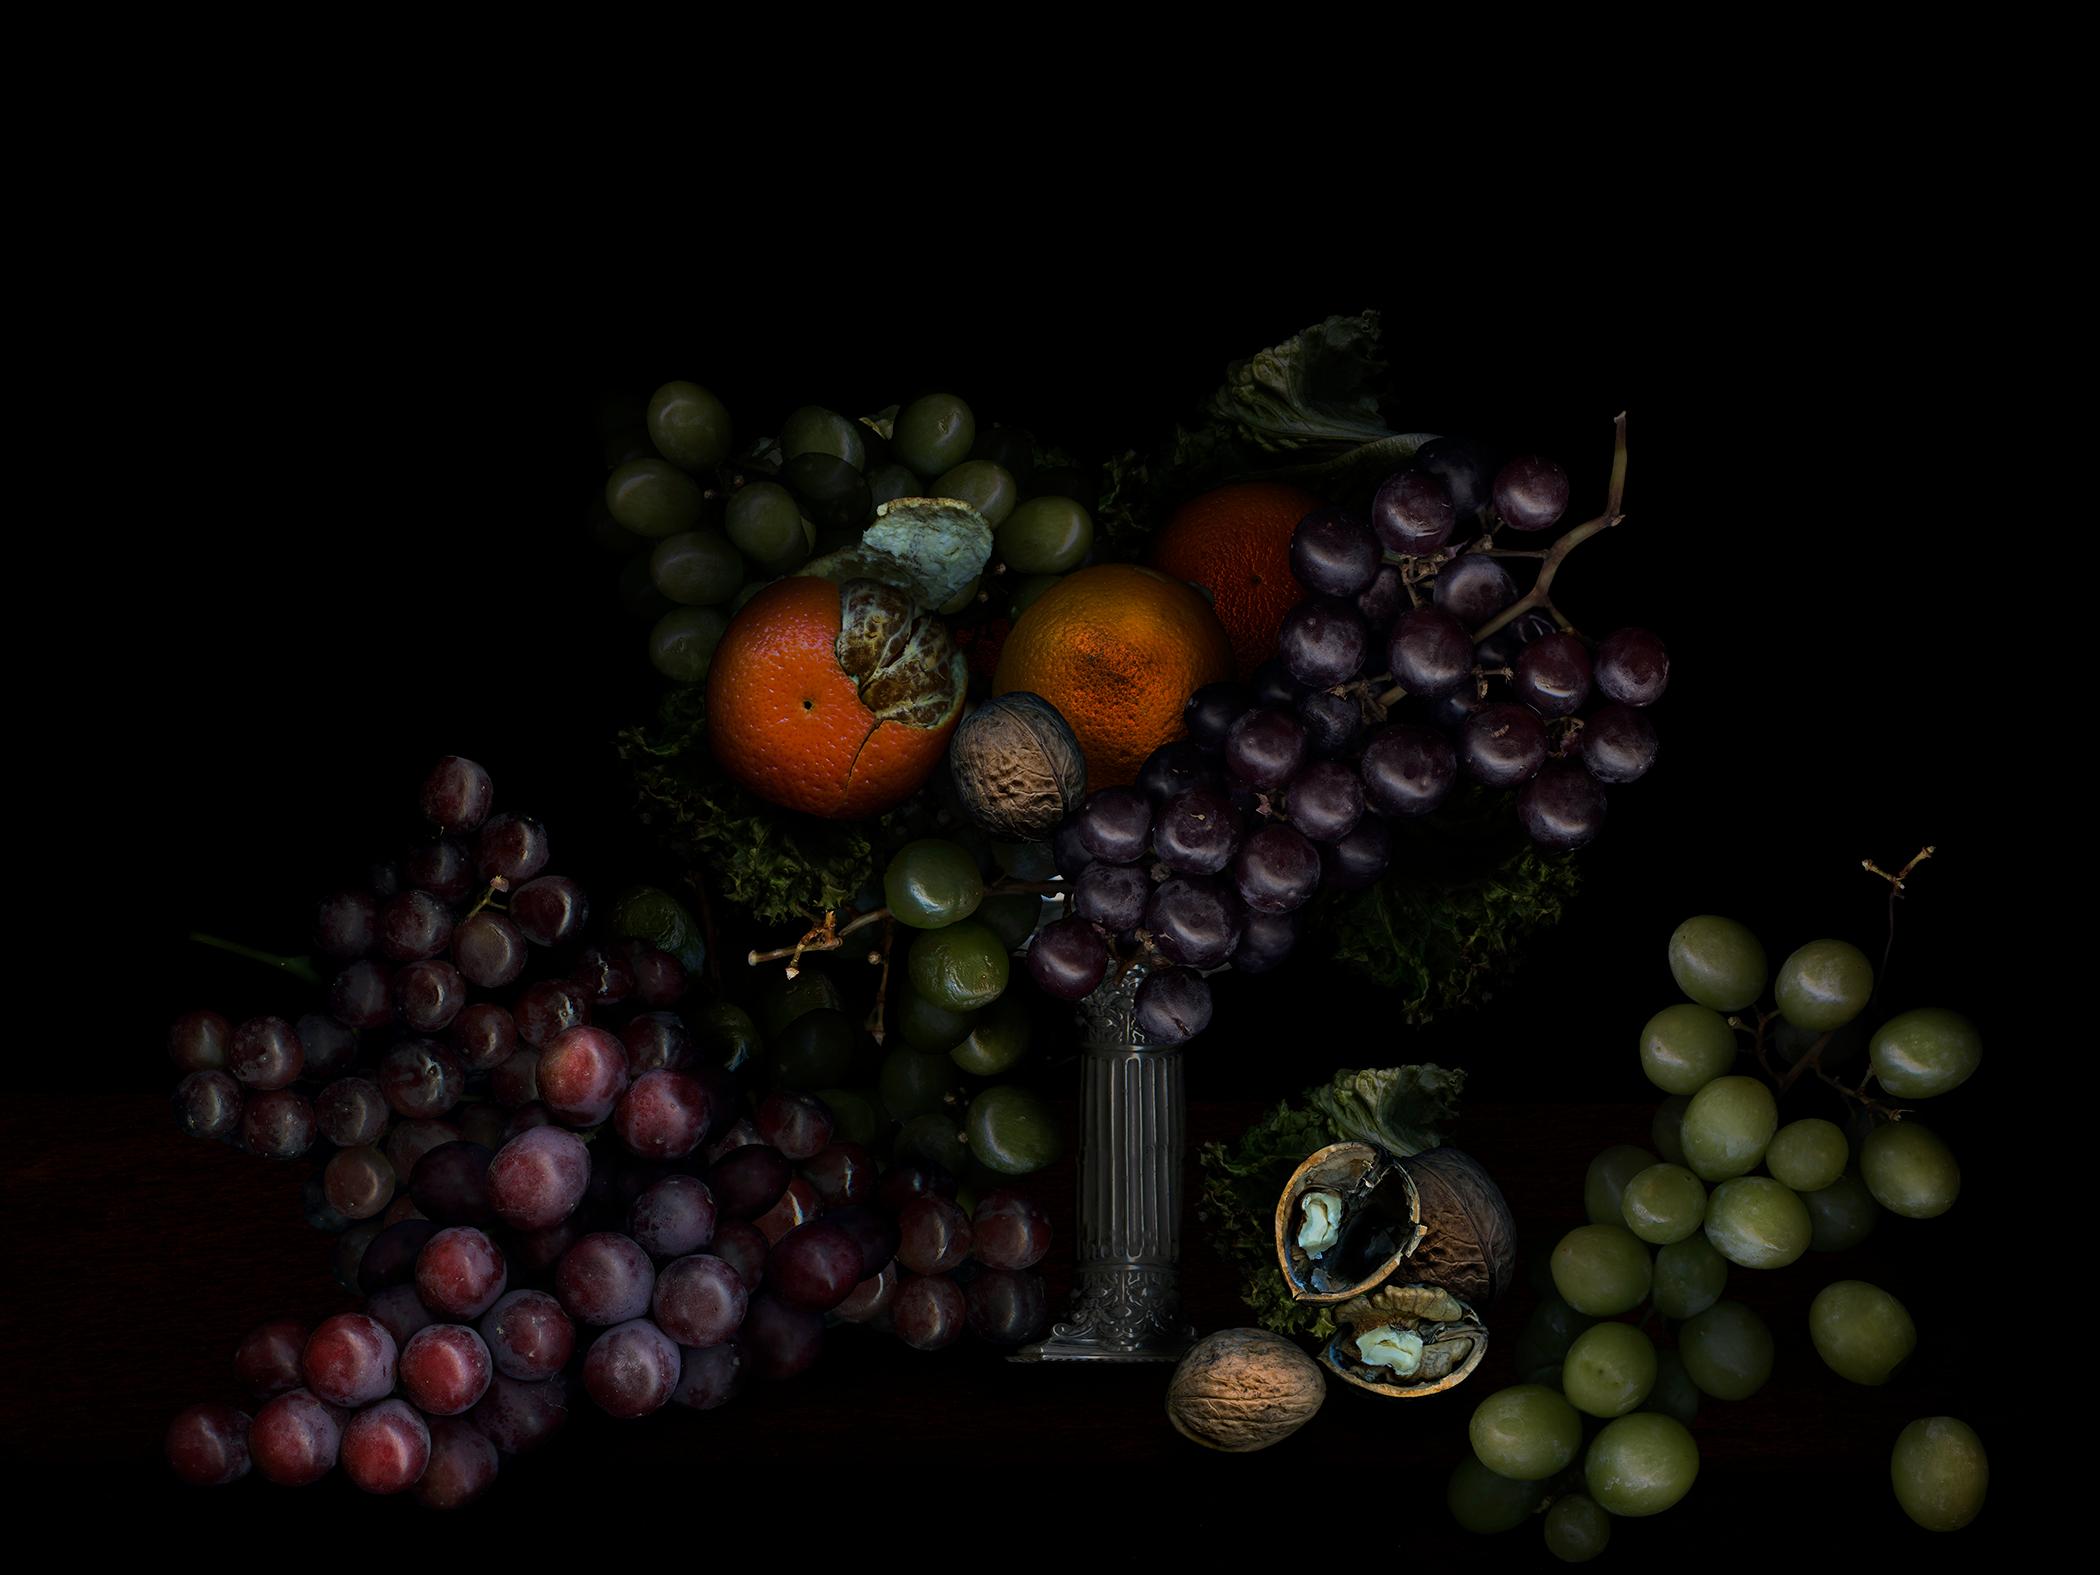 Fruits from my garden #7, by Zoltan Gerliczki
From the Vegetables from my garden series
Archival Pigment Print 
Image size: 39 in H x 48 in W.
Edition of 9 + 2AP
Unframed
2021

"We eat vegetables from our garden”. When Zoltan's gardening, He grows